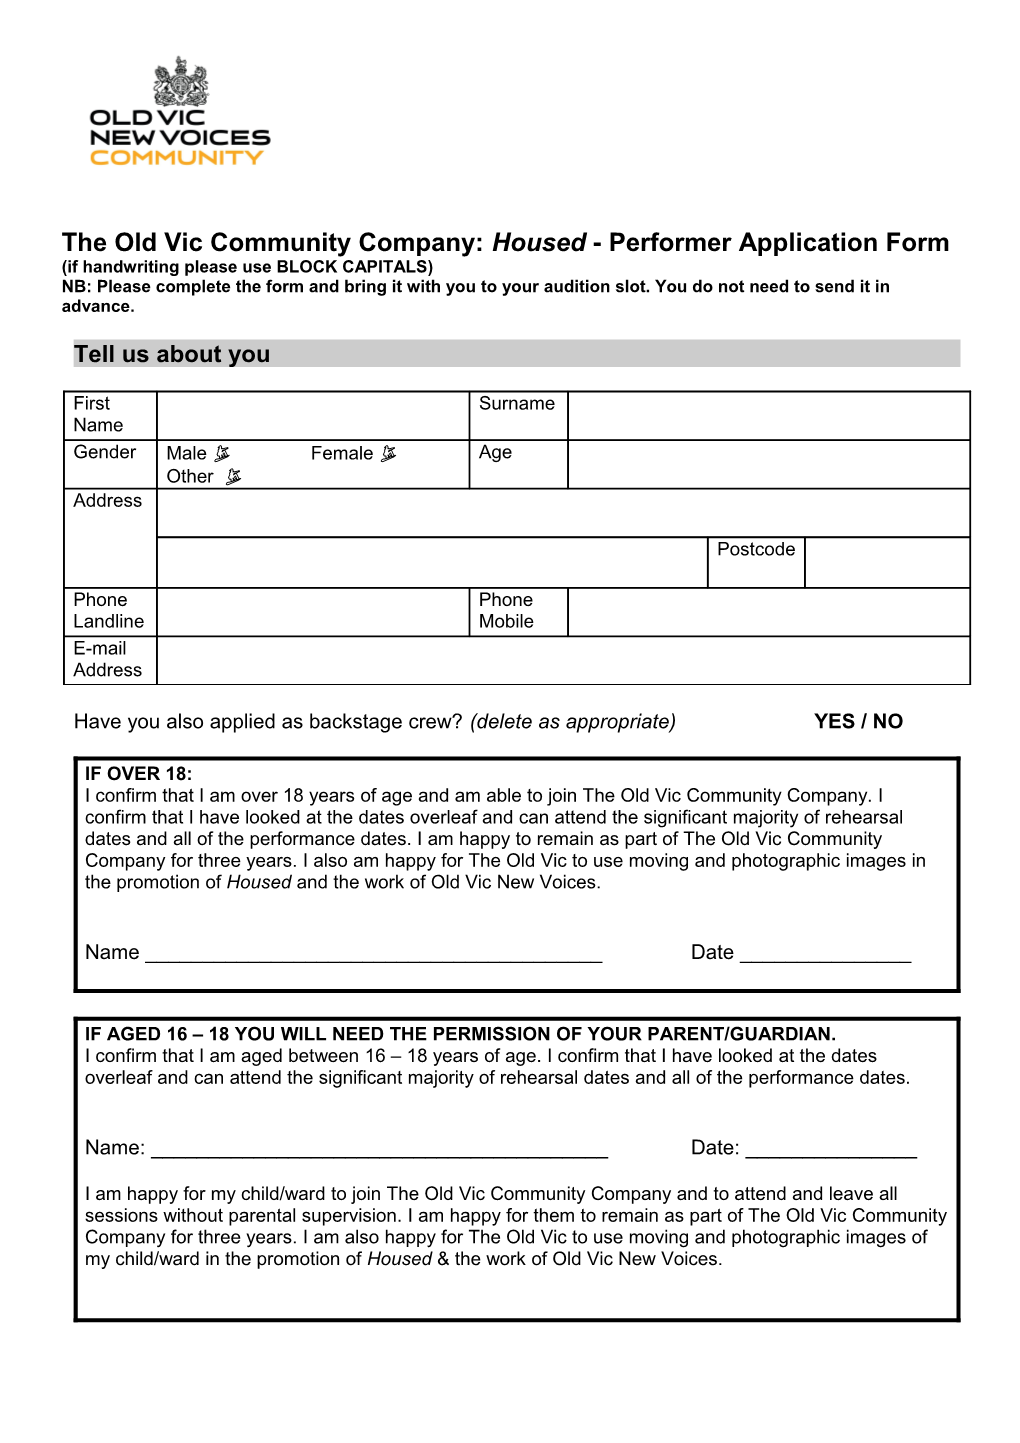 The Old Vic Community Company: Housed - Performerapplication Form(If Handwriting Please